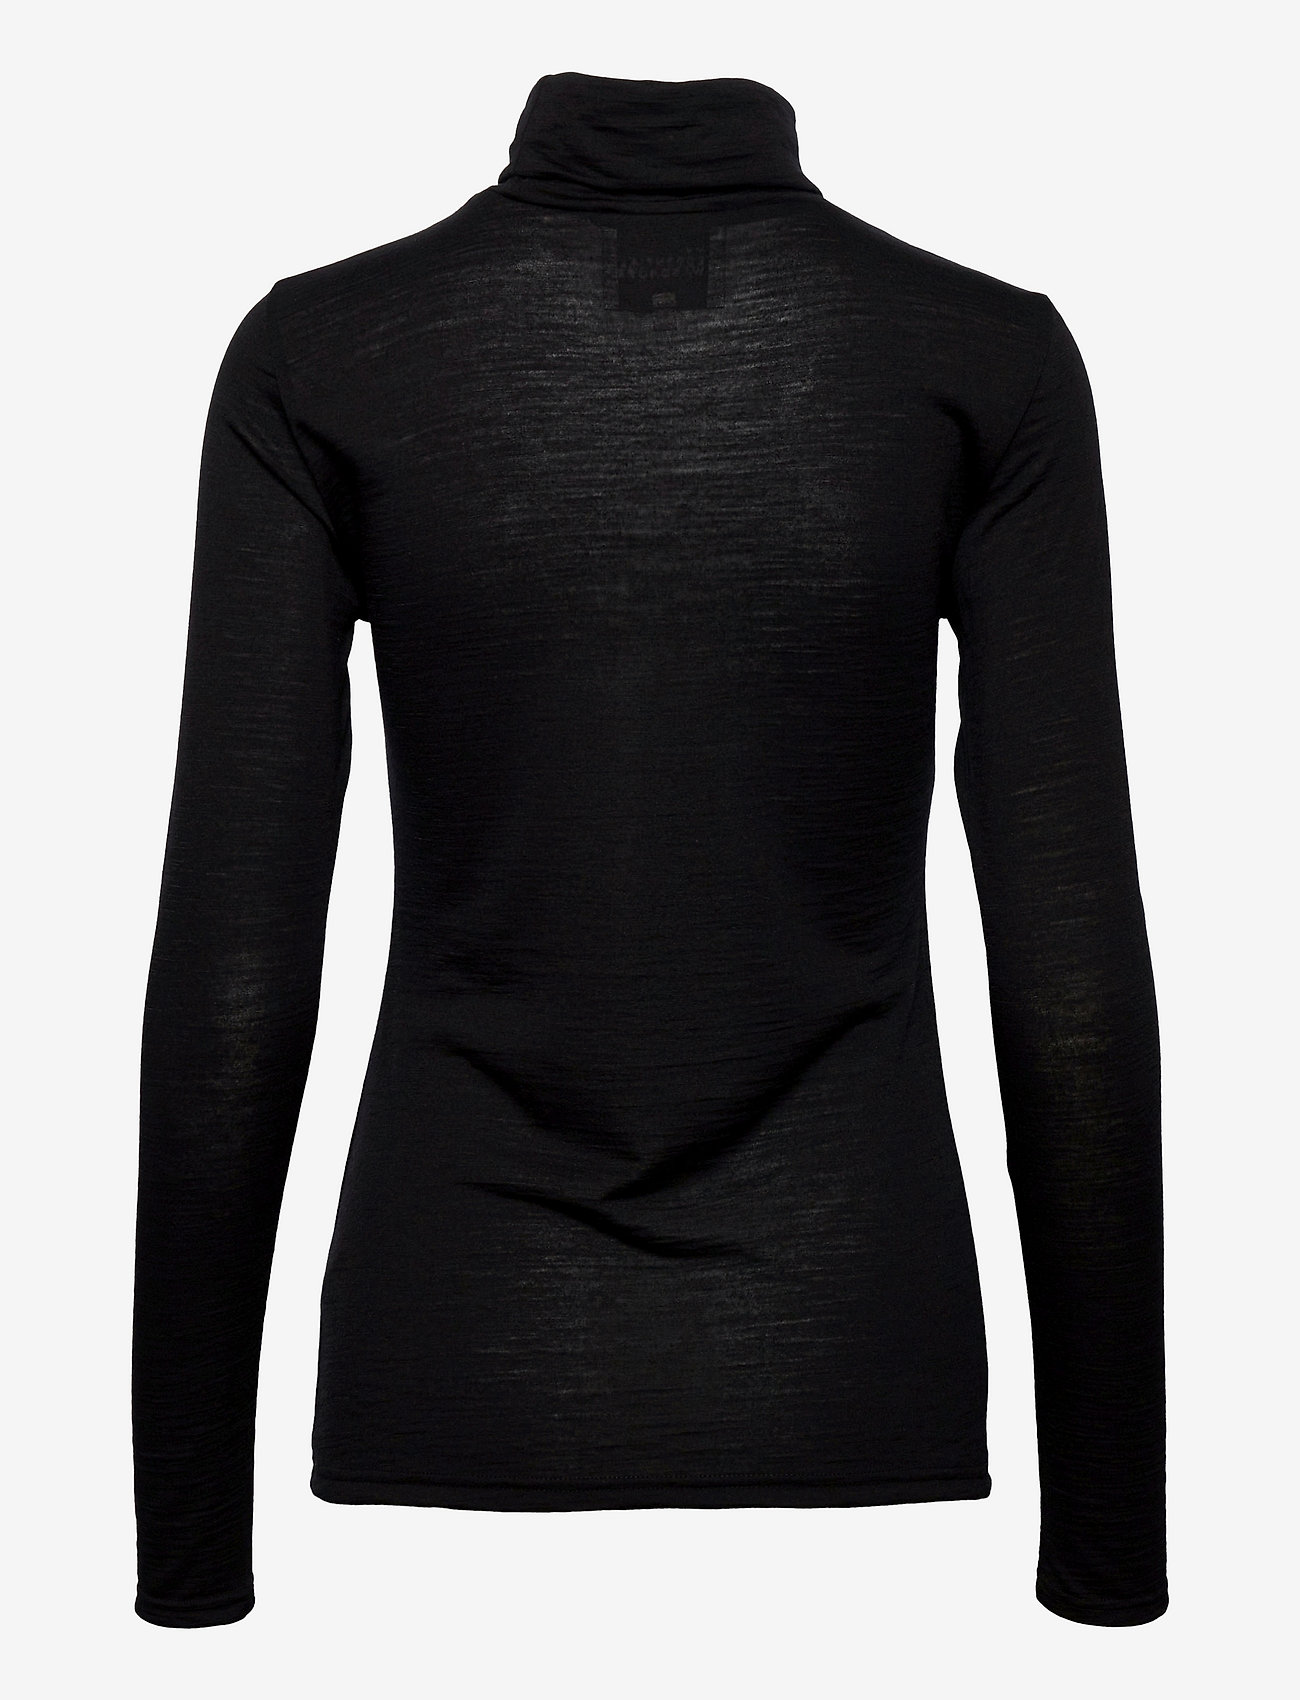 My Essential Wardrobe - 01 THE ROLLNECK - t-shirts & tops - black - 1